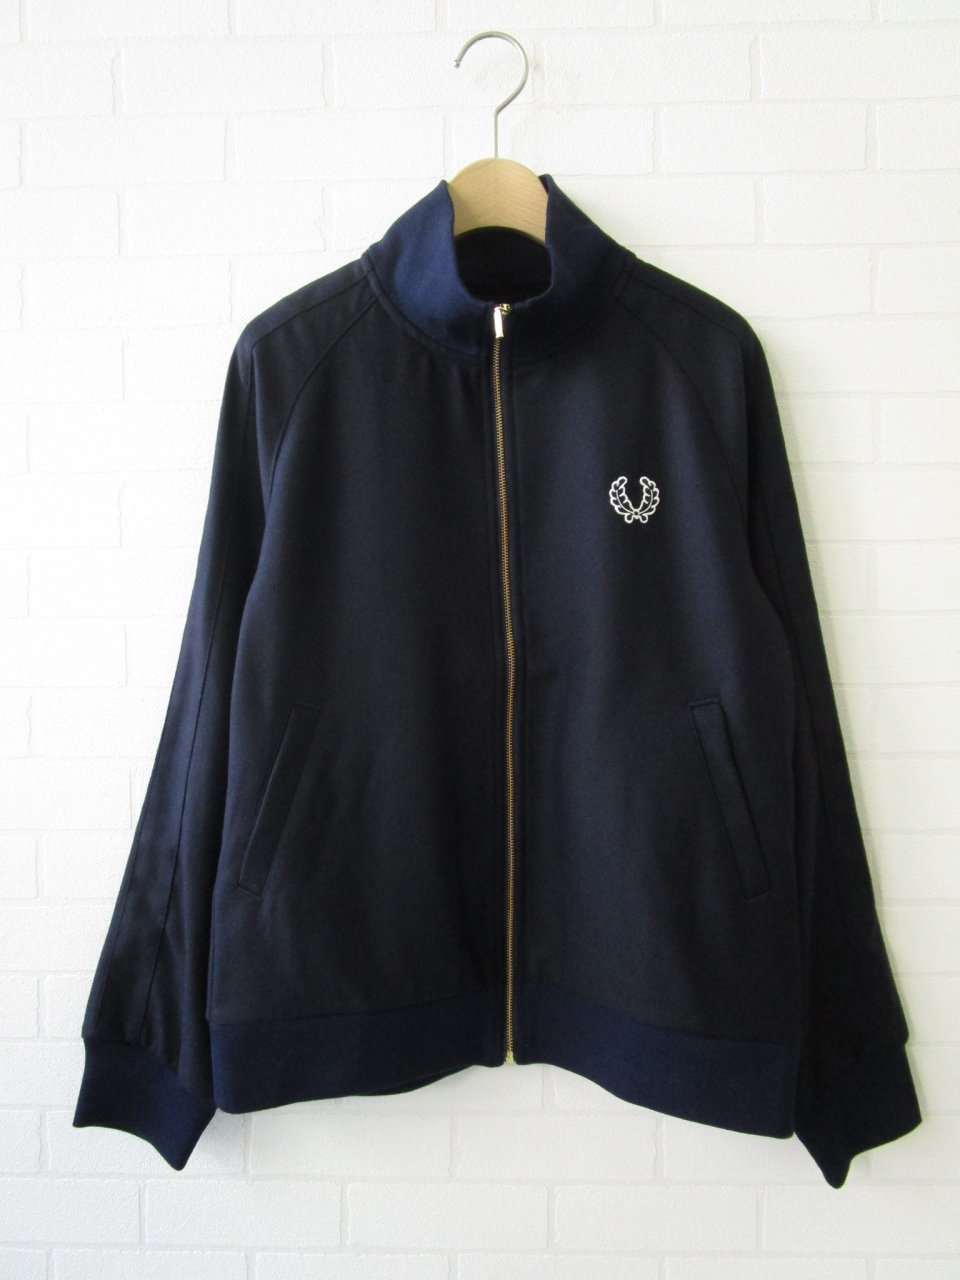 FRED PERRY - トラックジャケット - Sheth Online Store - シス 